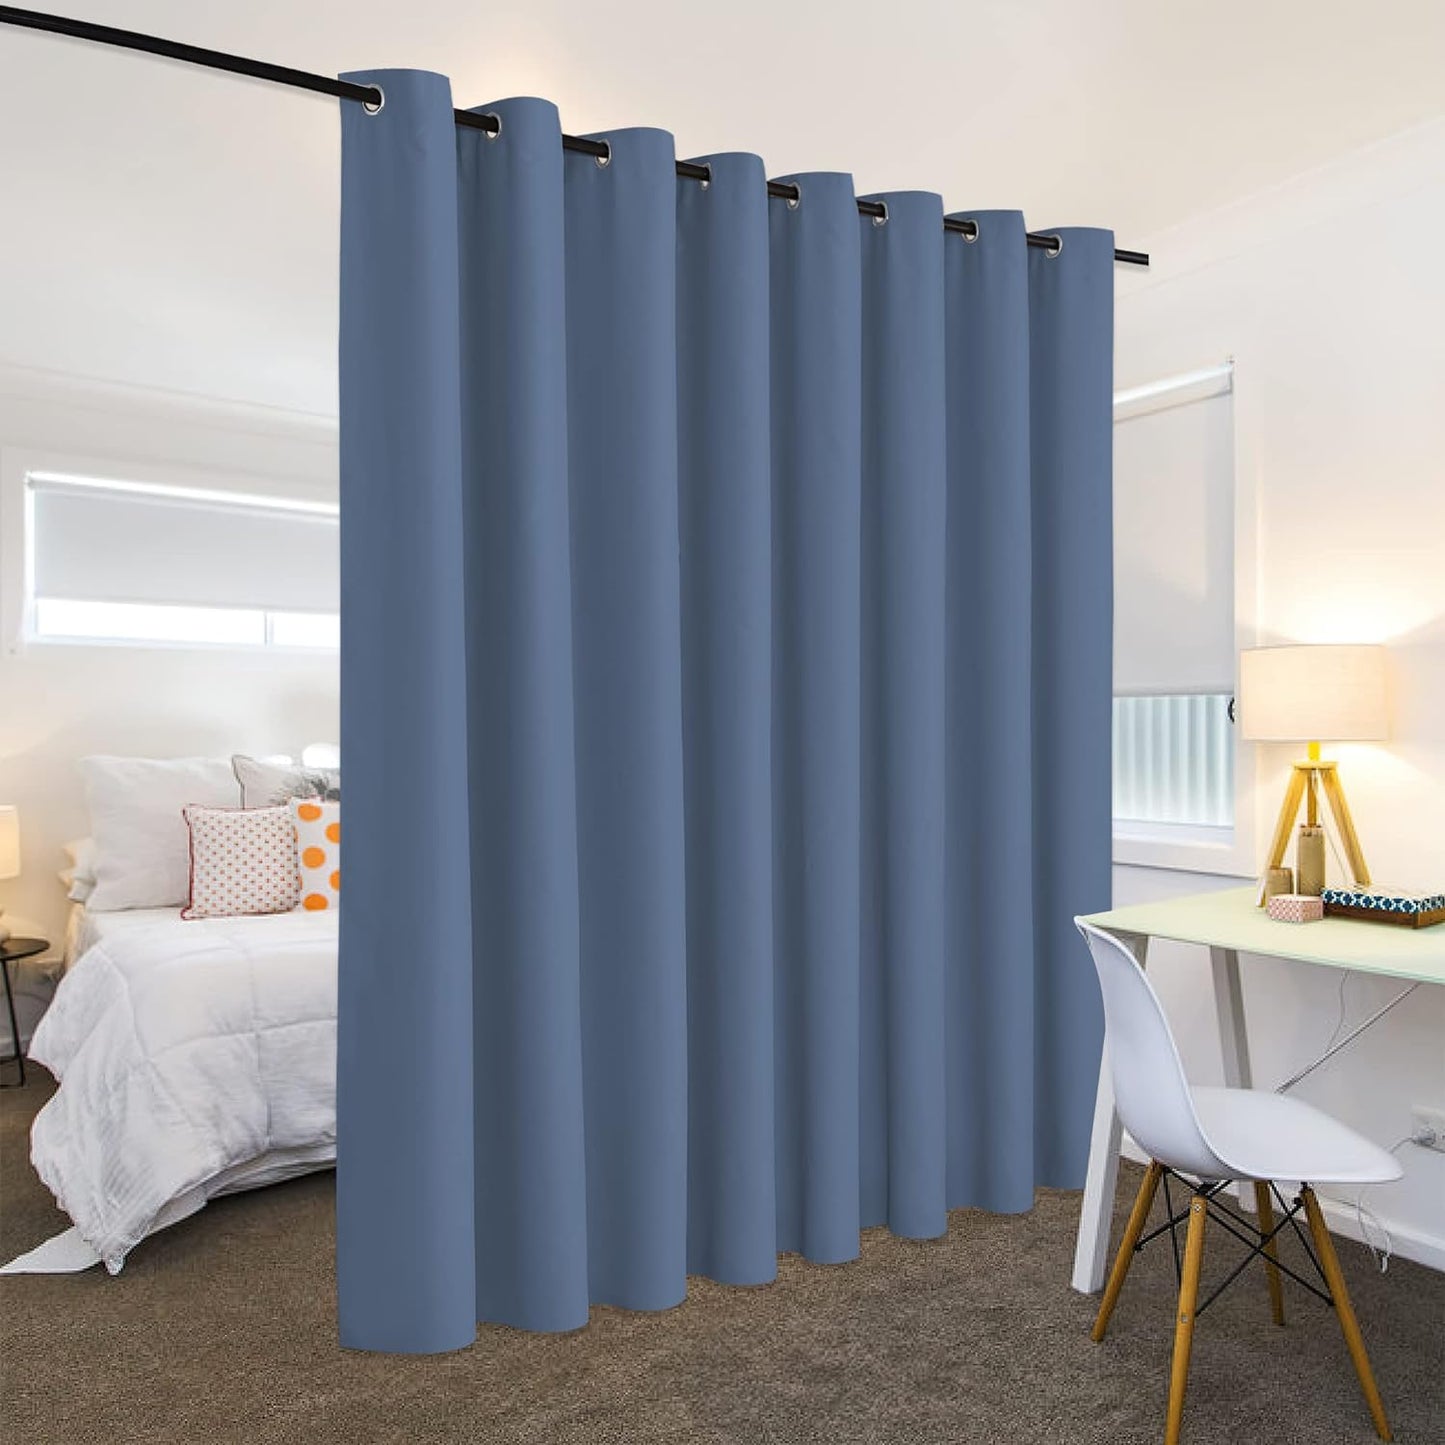 RYB HOME Room Divider Curtains - Privacy Blackout Thermal Insulating Large Window Curtains for Backdrop Patio Sliding Glass Door Operable Patitions, W 15Ft X L 9Ft, Stone Blue, 1 Panel  RYB HOME   